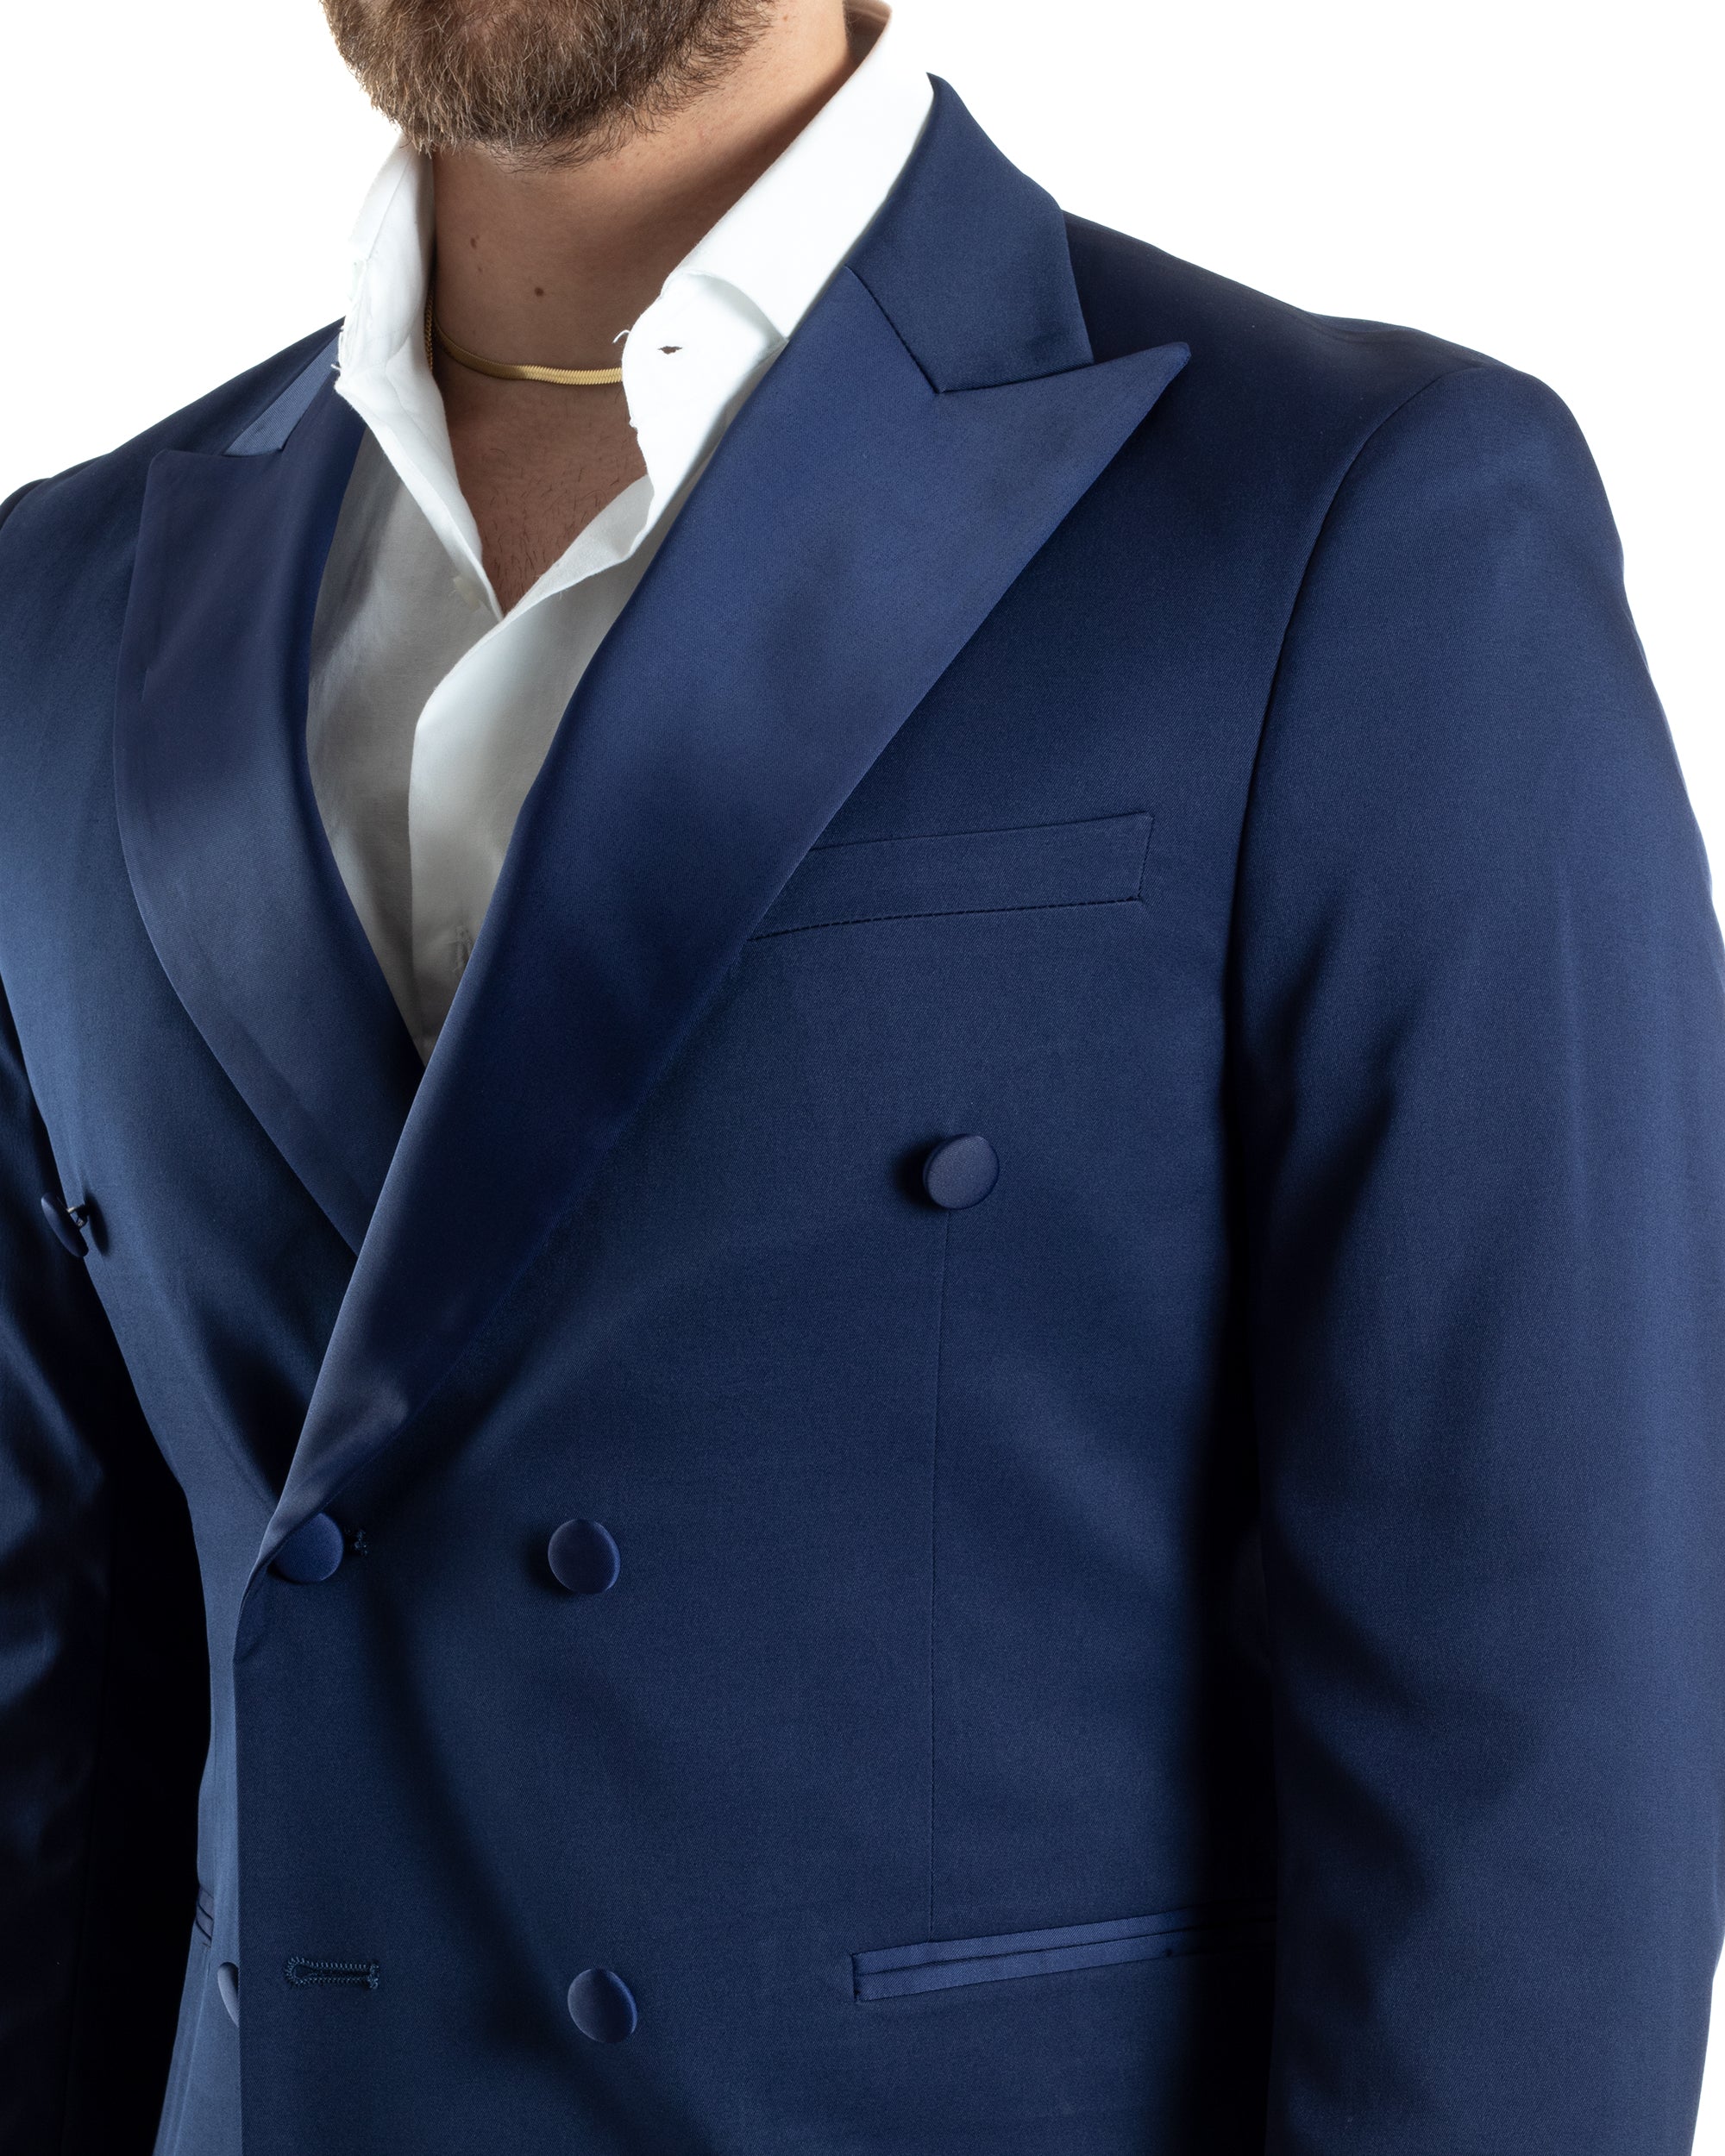 Double-Breasted Men's Suit Suit Jacket Trousers Blue Pinstripe Elegant Casual GIOSAL-OU2404A